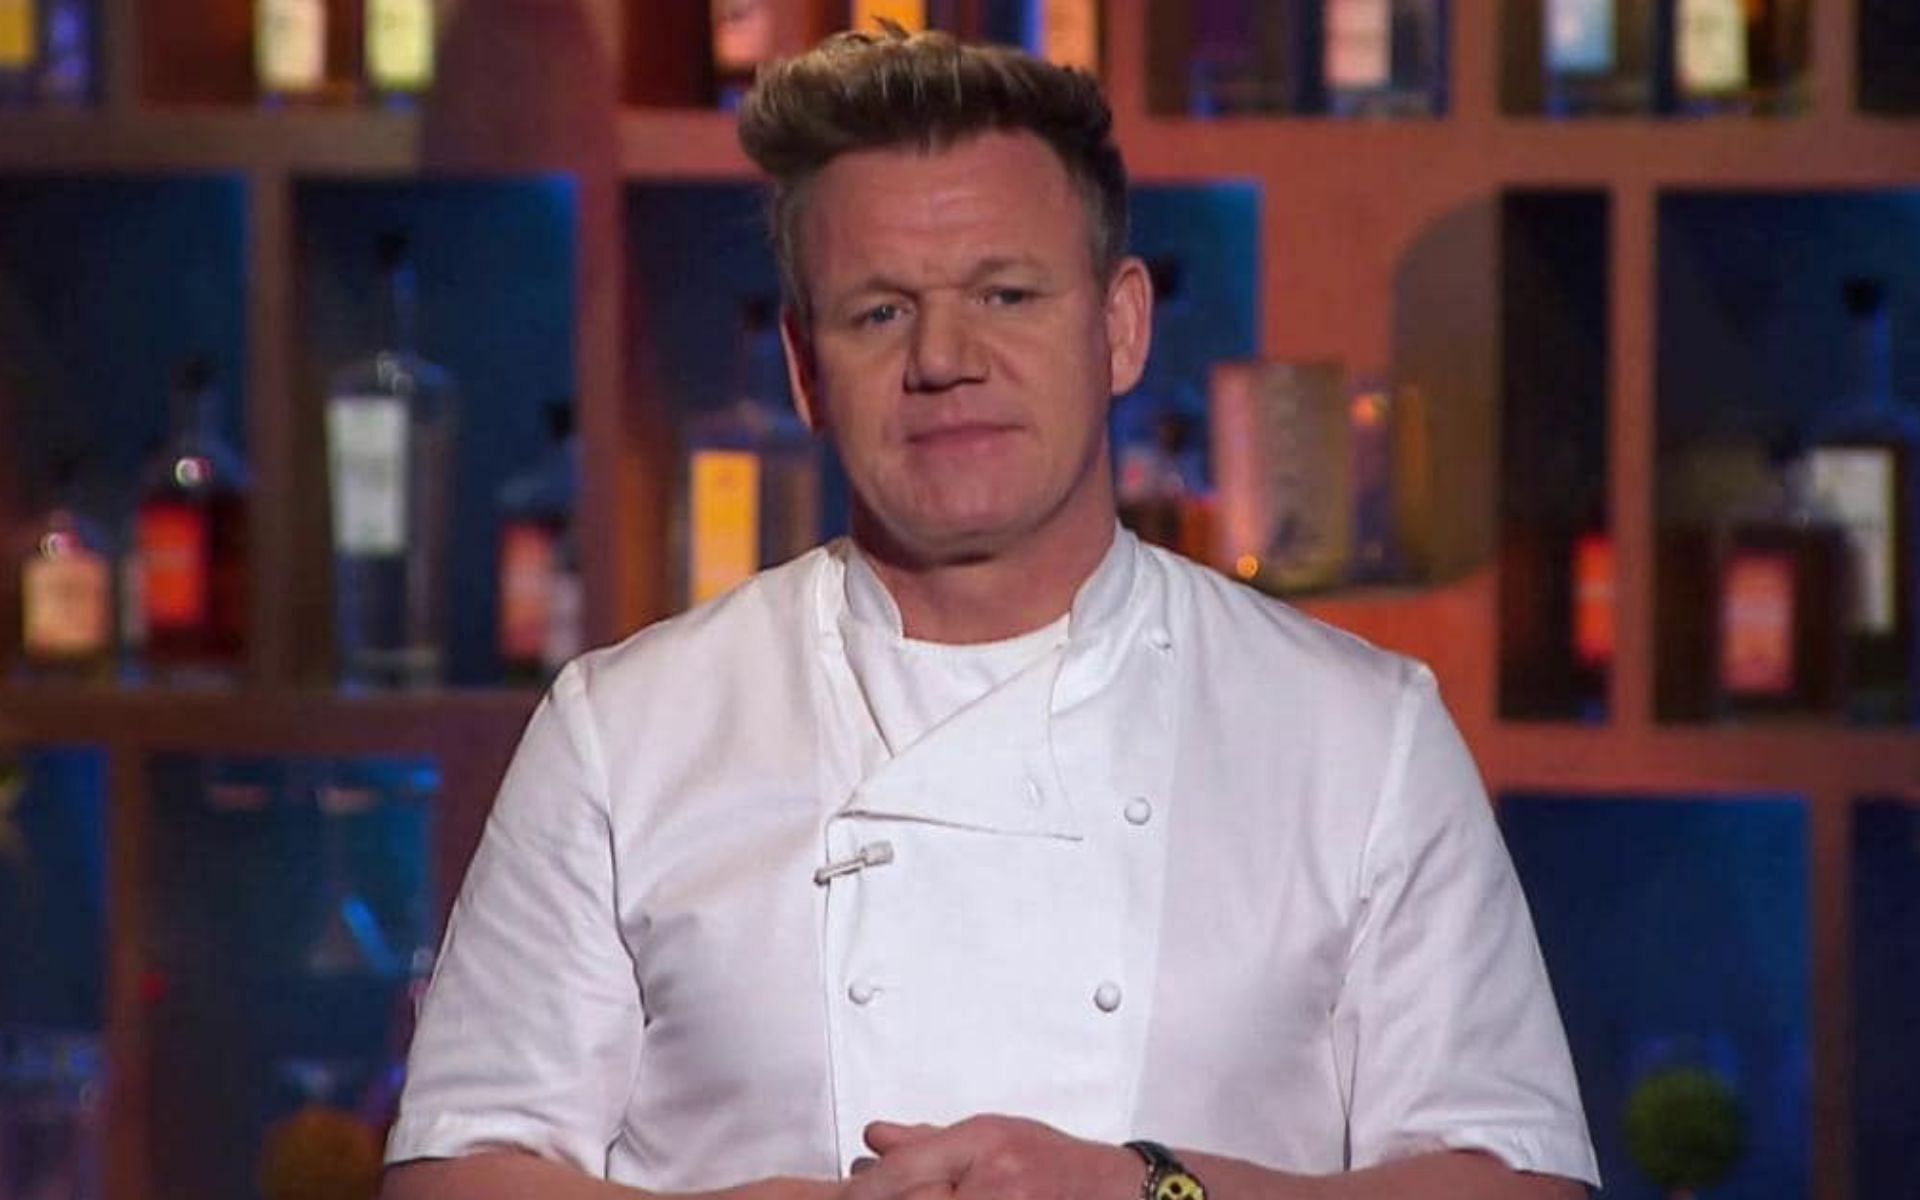 Gordon evicts two contestants for slow dinner service (Image via Fox)